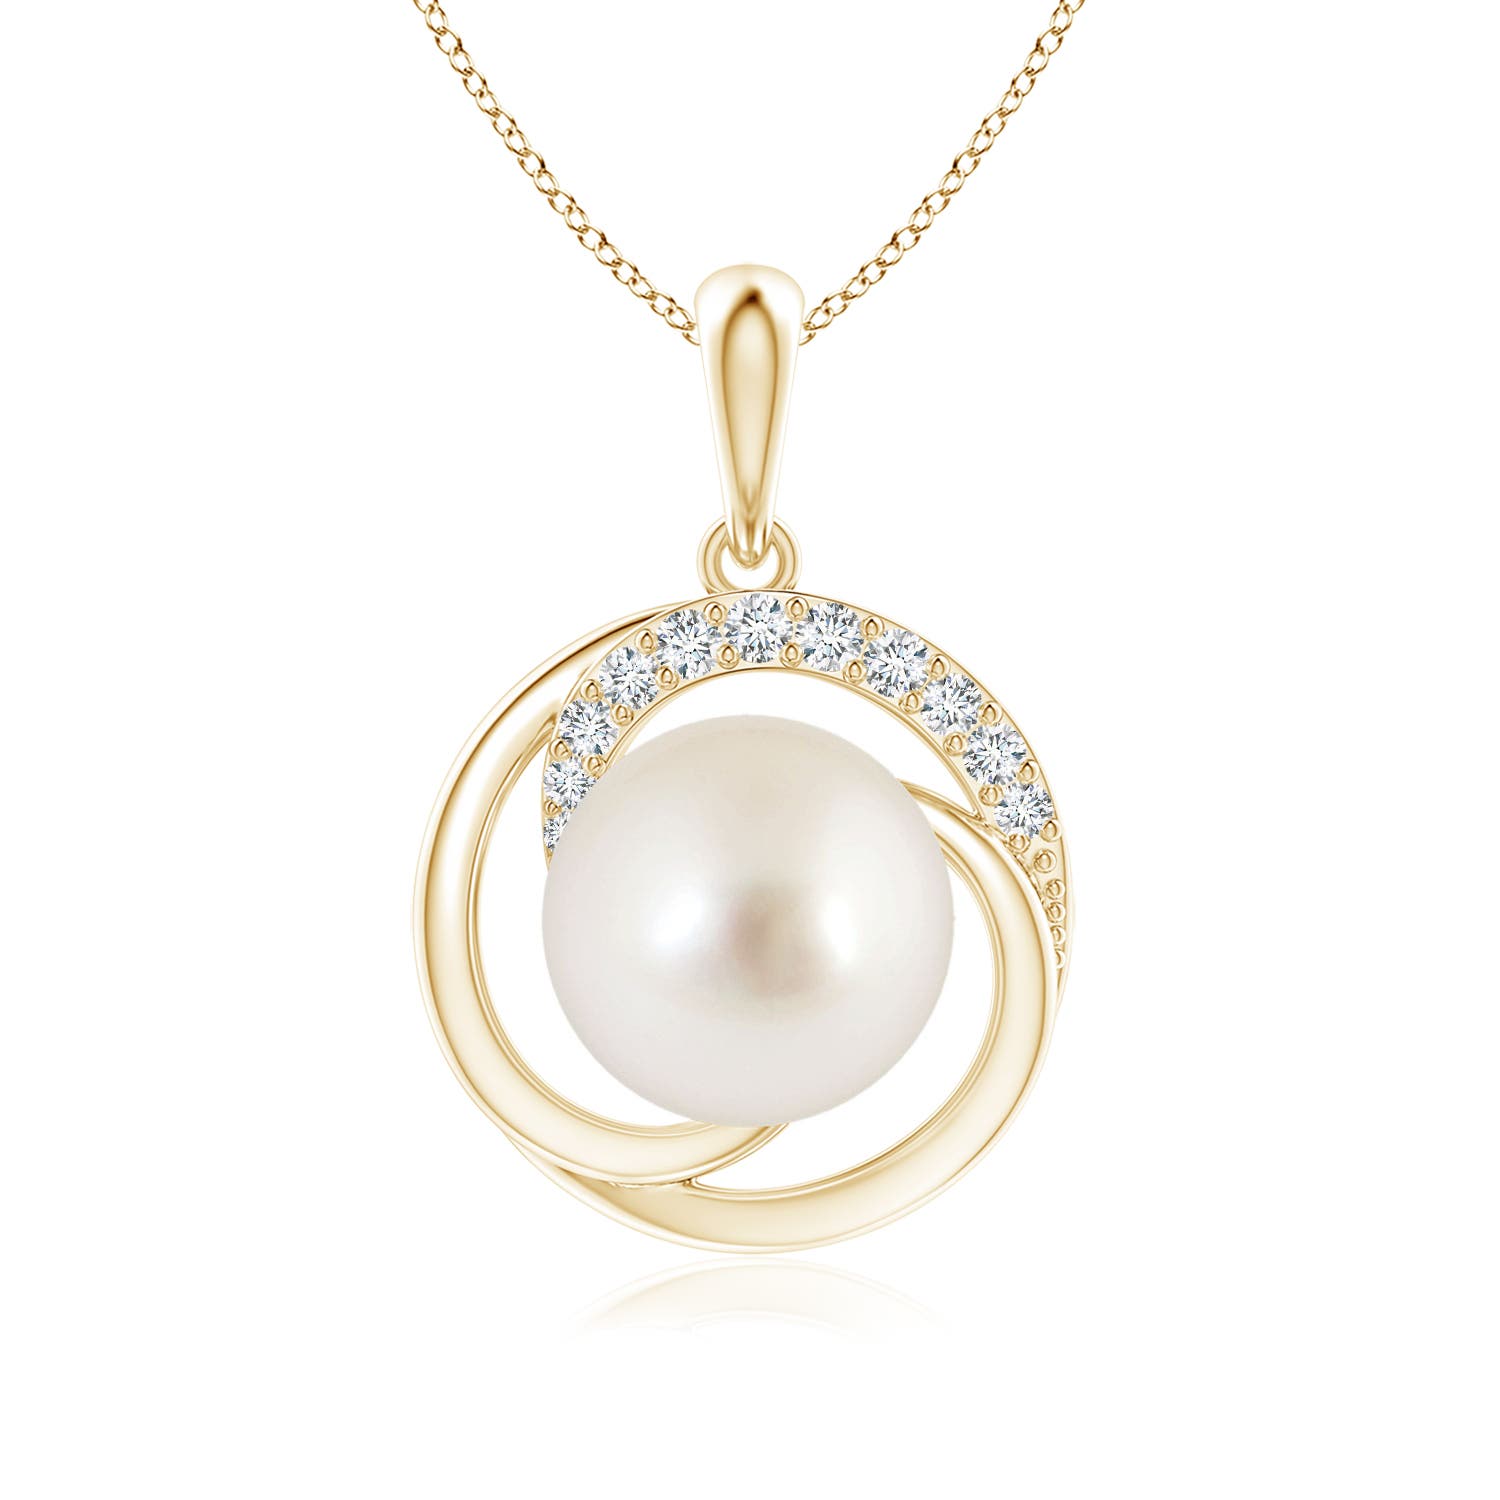 AAAA - South Sea Cultured Pearl / 5.36 CT / 14 KT Yellow Gold